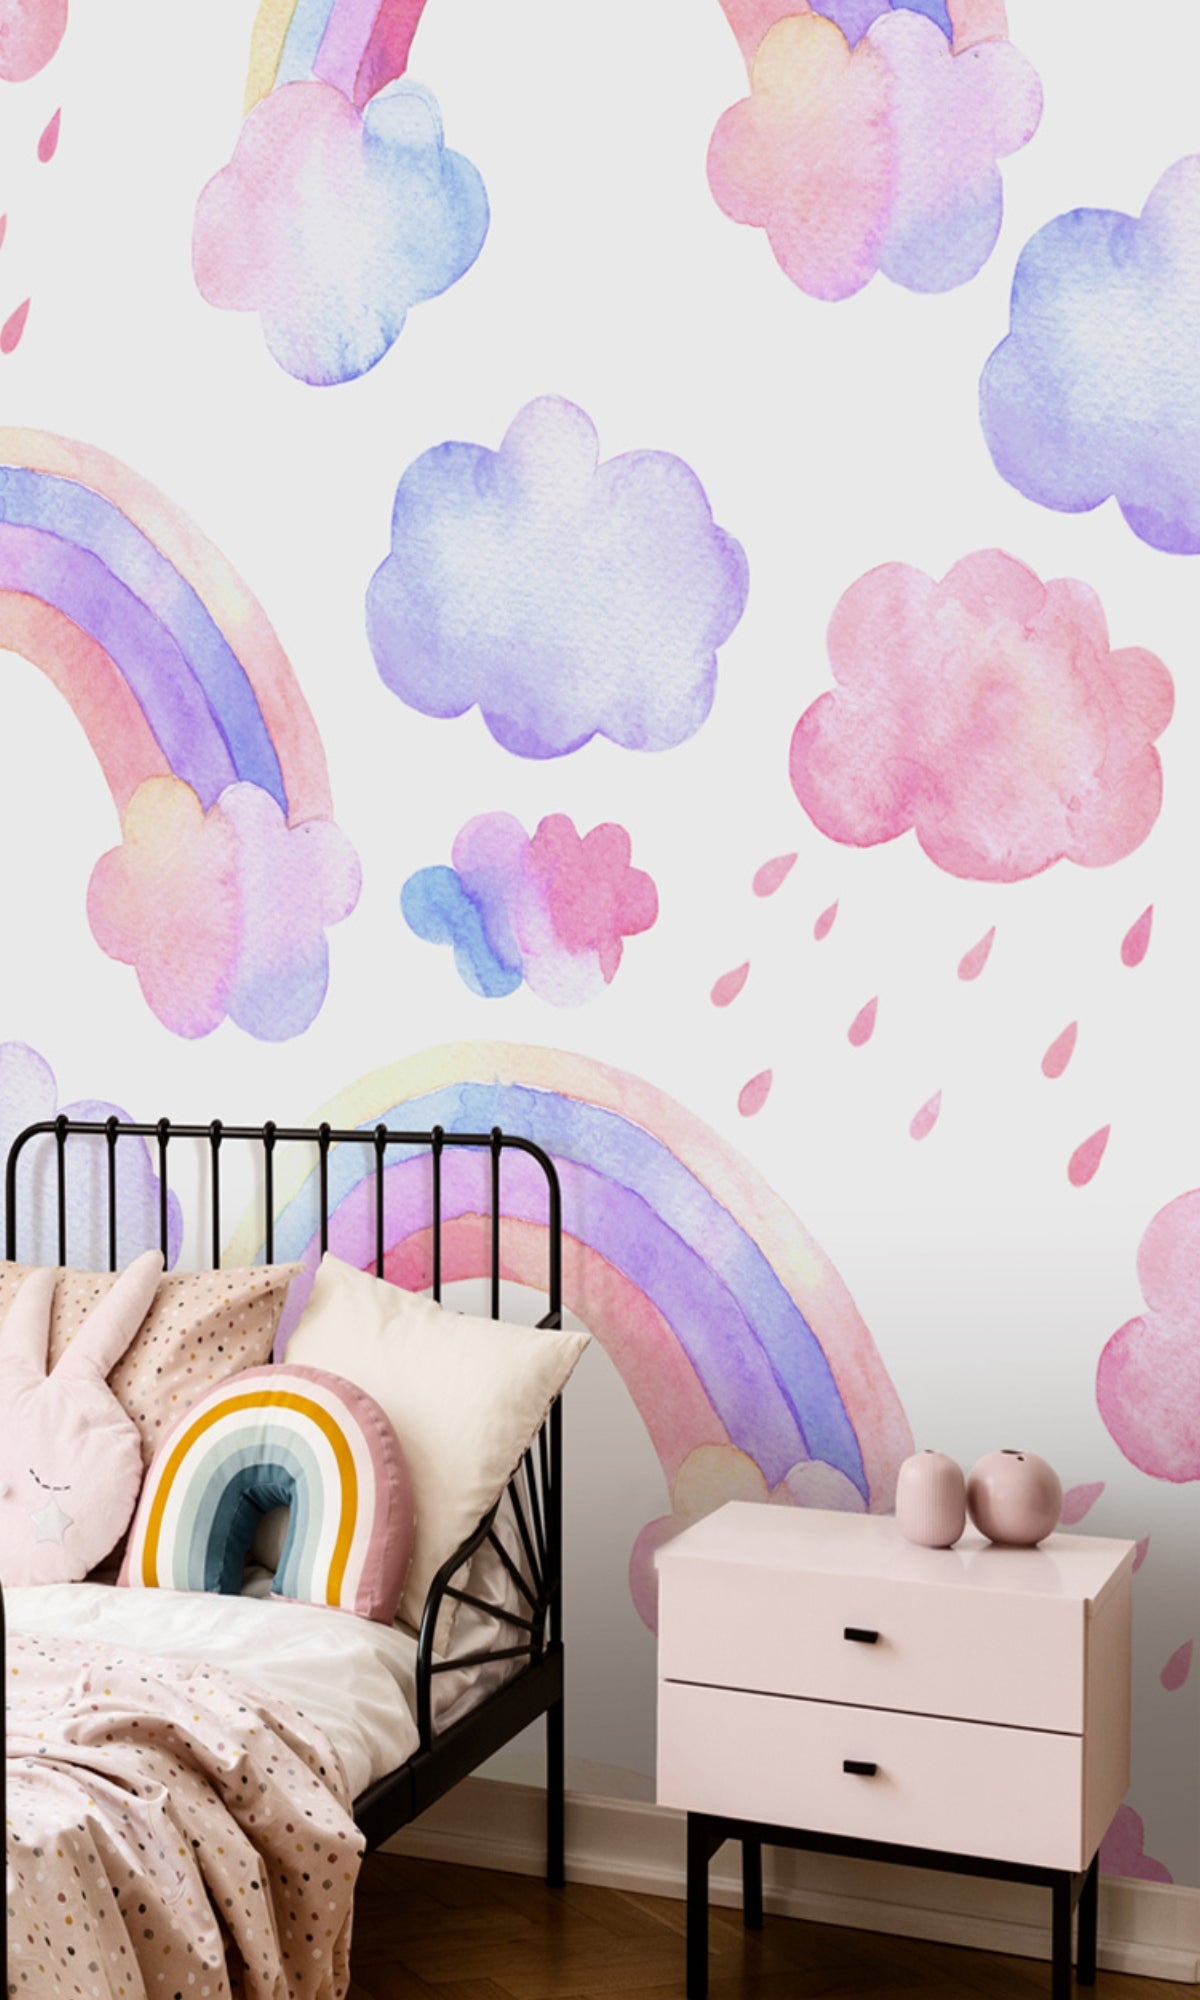 Colorful Rainbow and Clouds Mural Wallpaper M1469